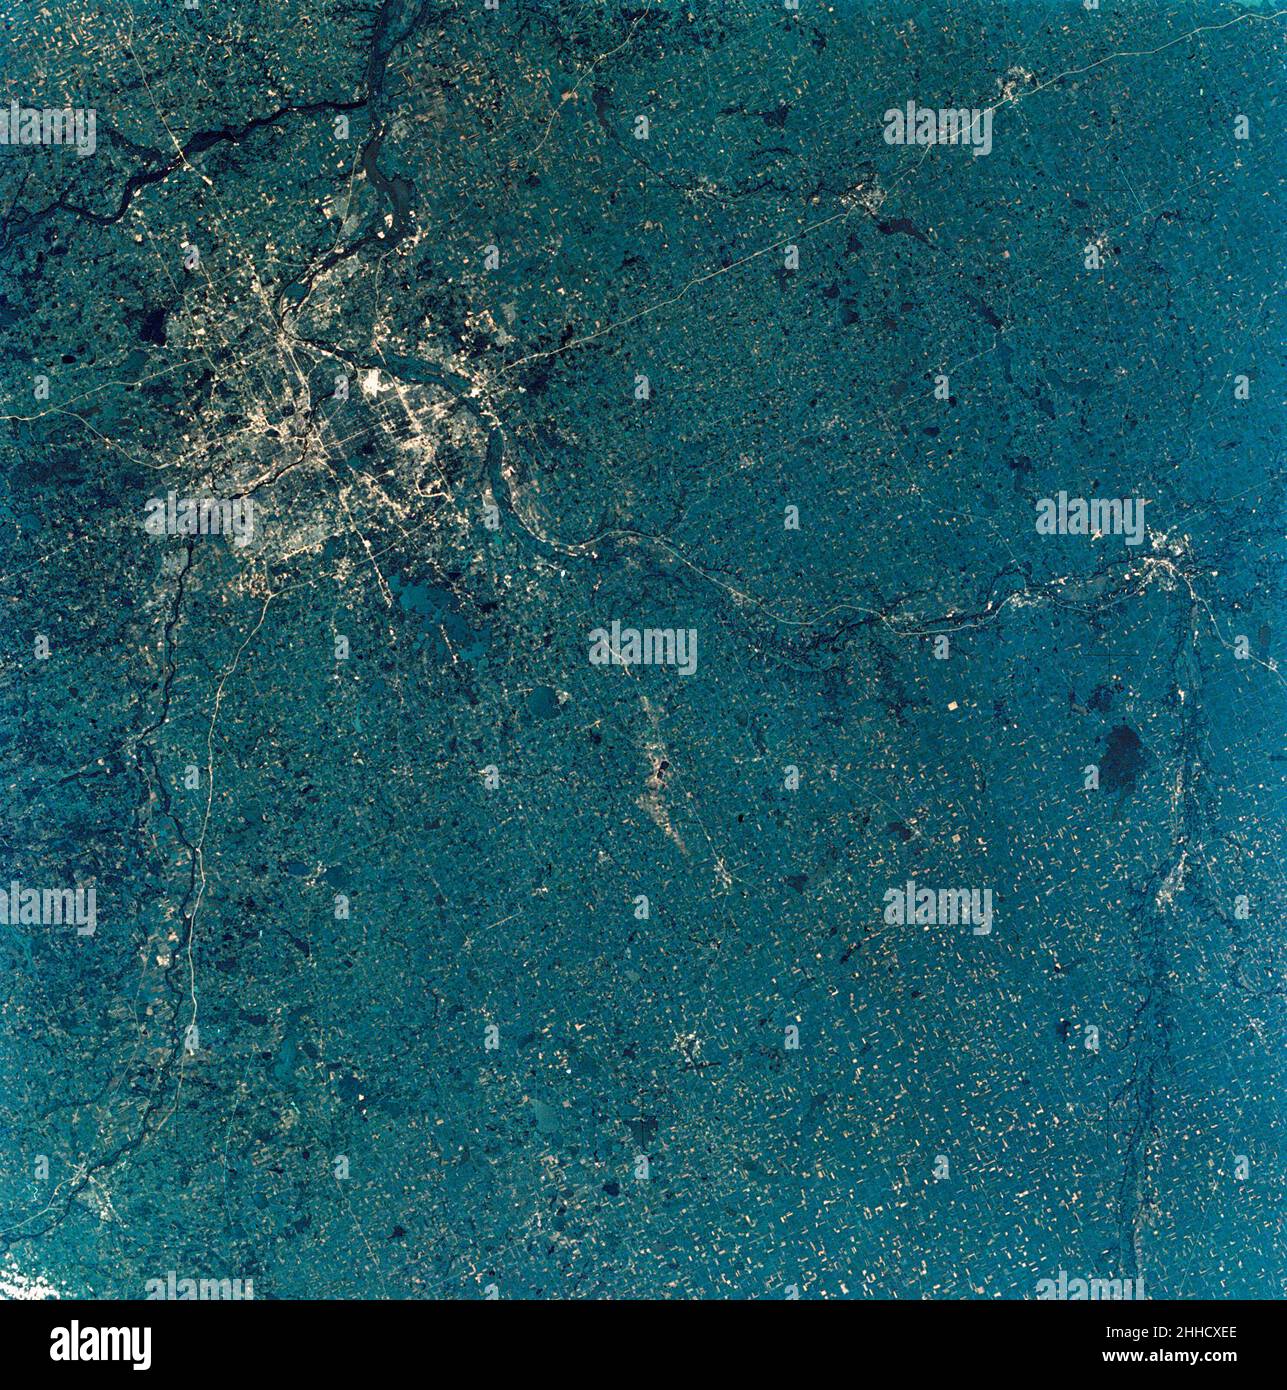 (July-September 1973) --- A near vertical view of the Minneapolis-St. Paul, Minnesota area, as photographed from Earth orbit by one of the six lenses of the Itek-furnished S190-A Multispectral Photographic Facility Experiment in the Multiple Docking Adapter of the Skylab space station. A 150mm lens, with SO-356 high definition Ektachrome film, was used to take this picture. The Mississippi River flows southeasterly through this large metropolitan area. Minneapolis is on the west bank of the Mississippi. The Minnesota River makes a large bend at the southern edge of the picture then flows north Stock Photo